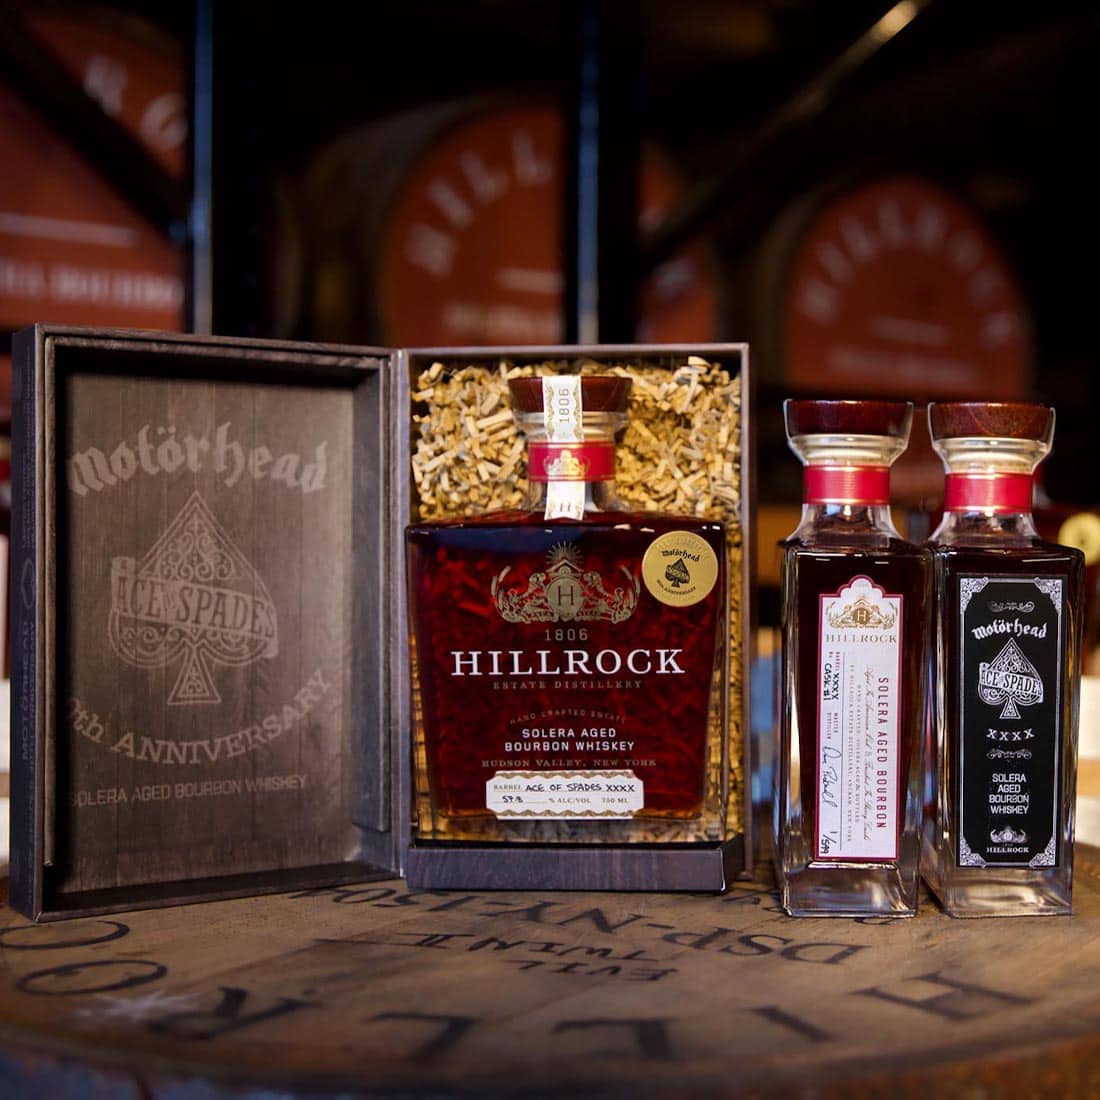 Motorhead partners with Hillrock distillery to launch a limited edition bourbon in celebration of the 40th anniversary of their album, Ace of Spades